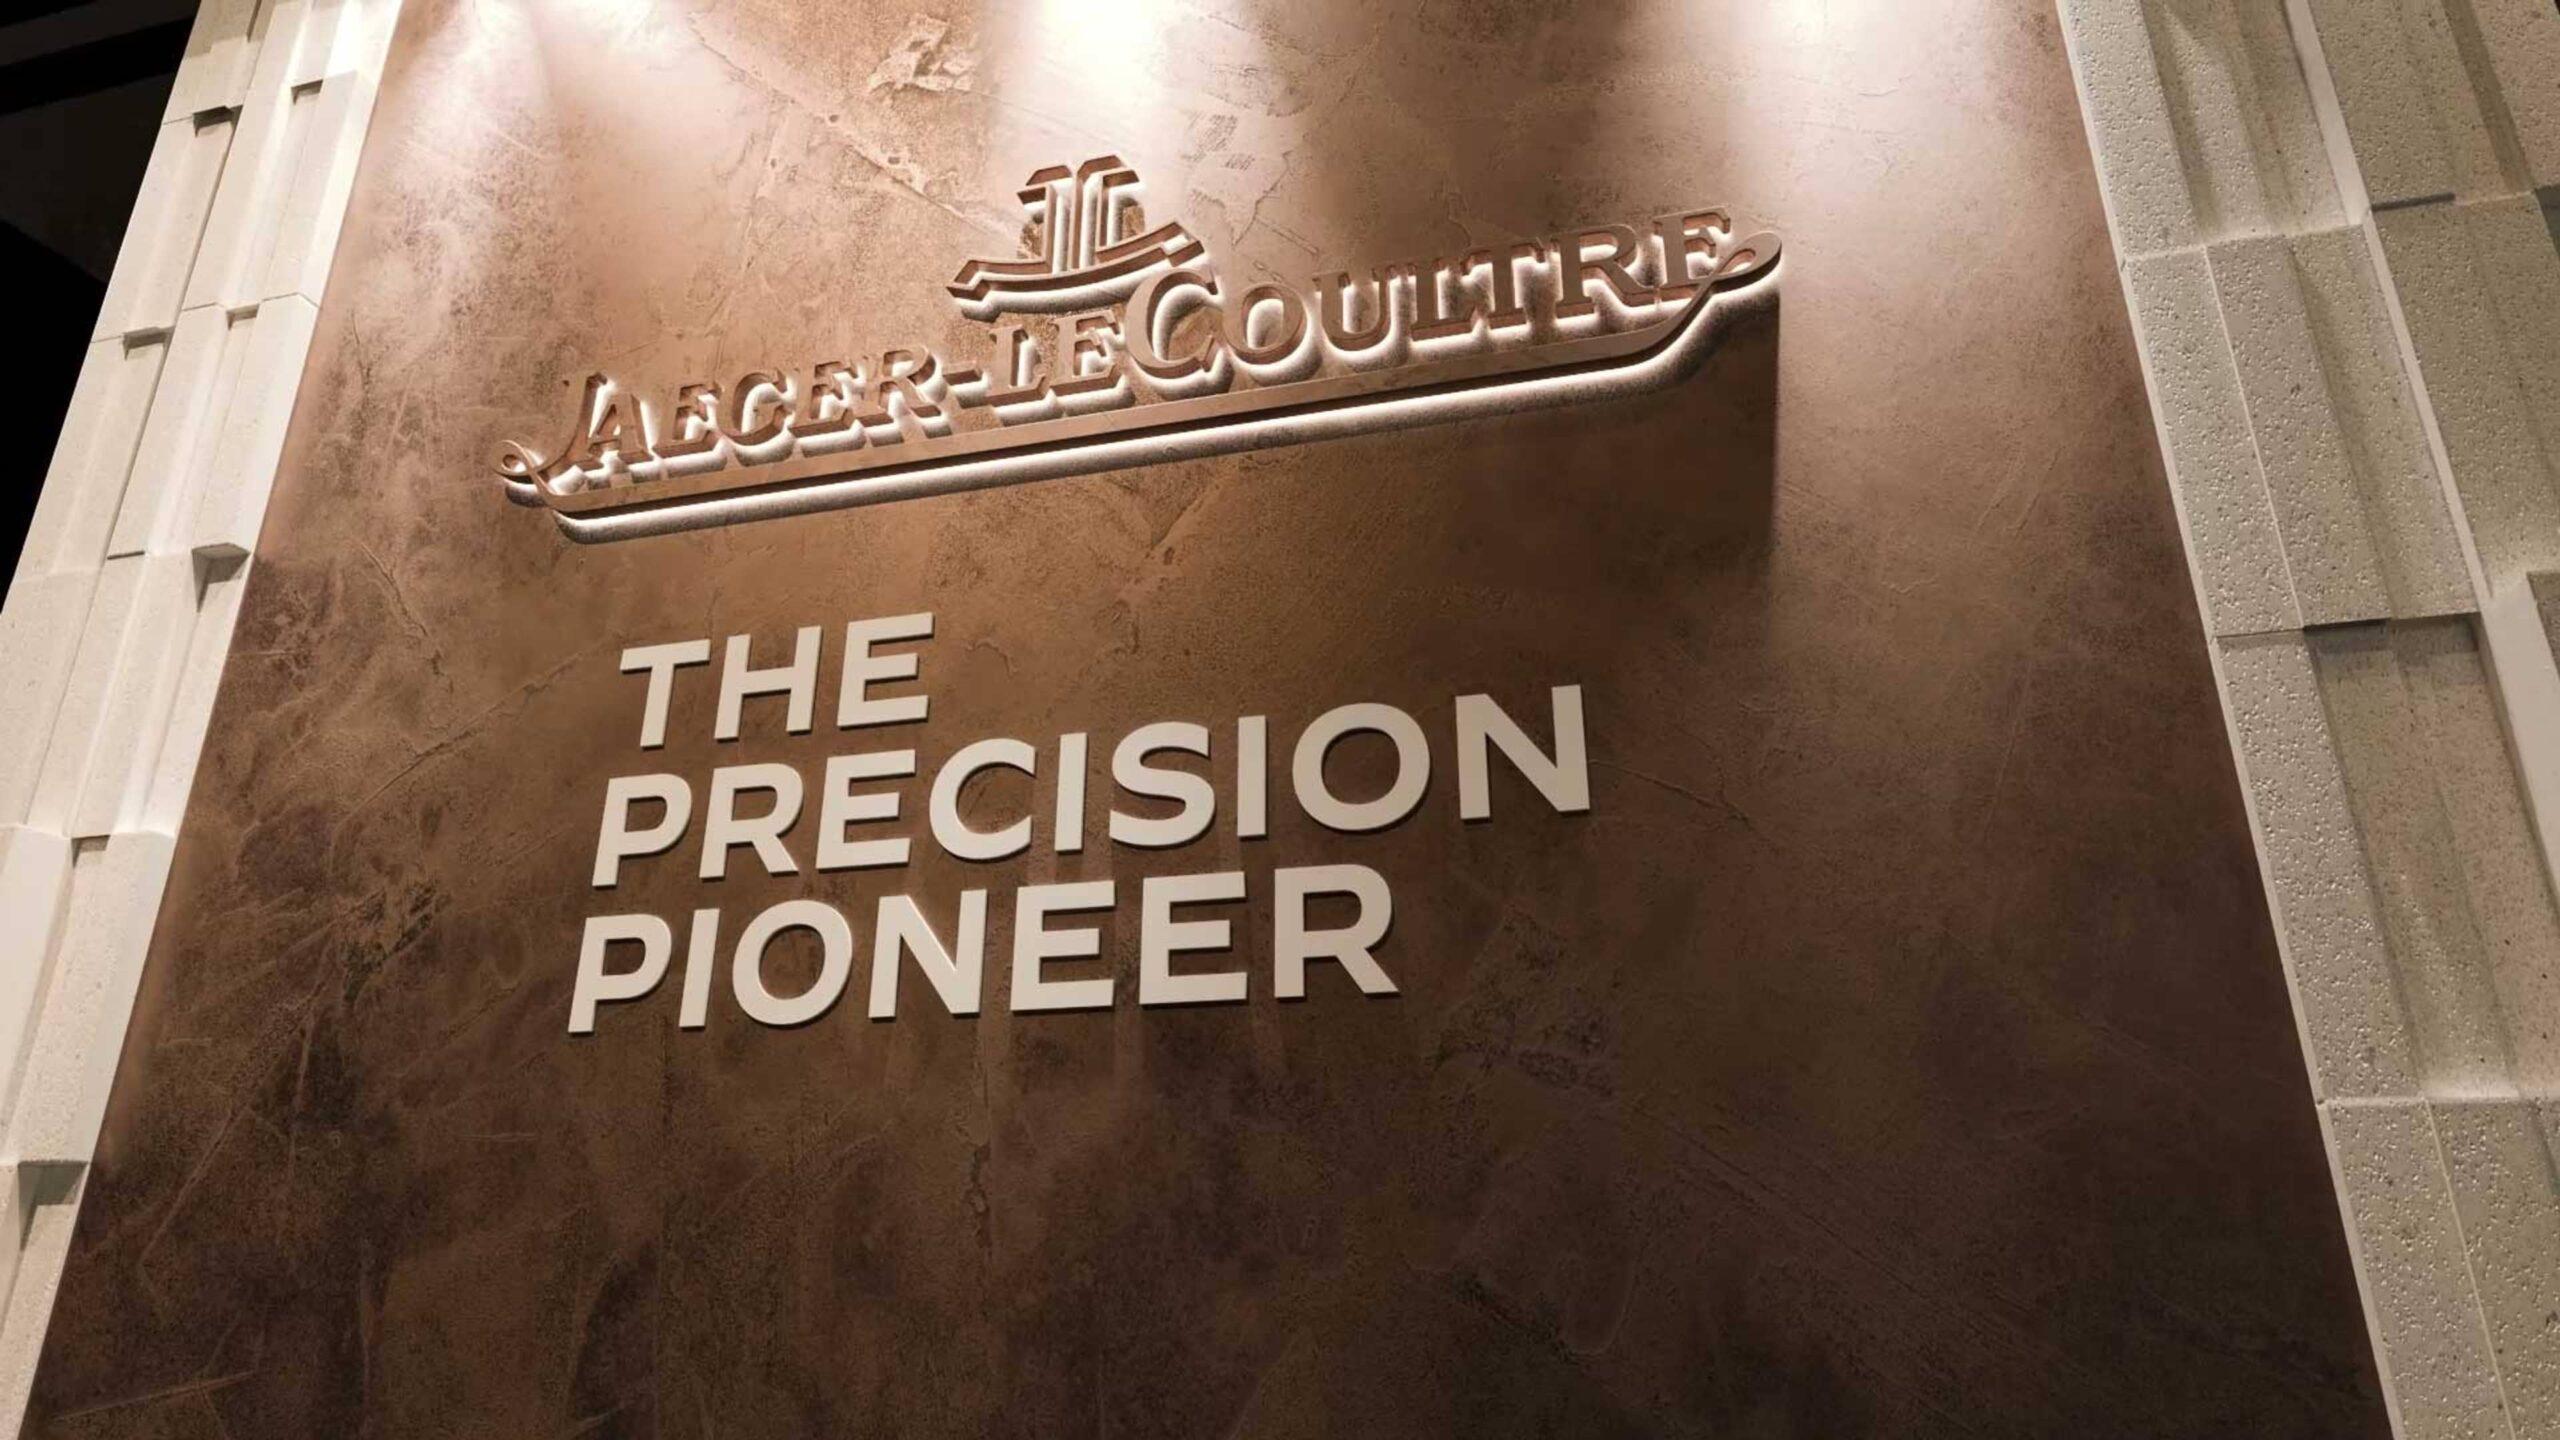 Jaeger-LeCoultre's Precision Pioneer Exhibition is coming to Dubai